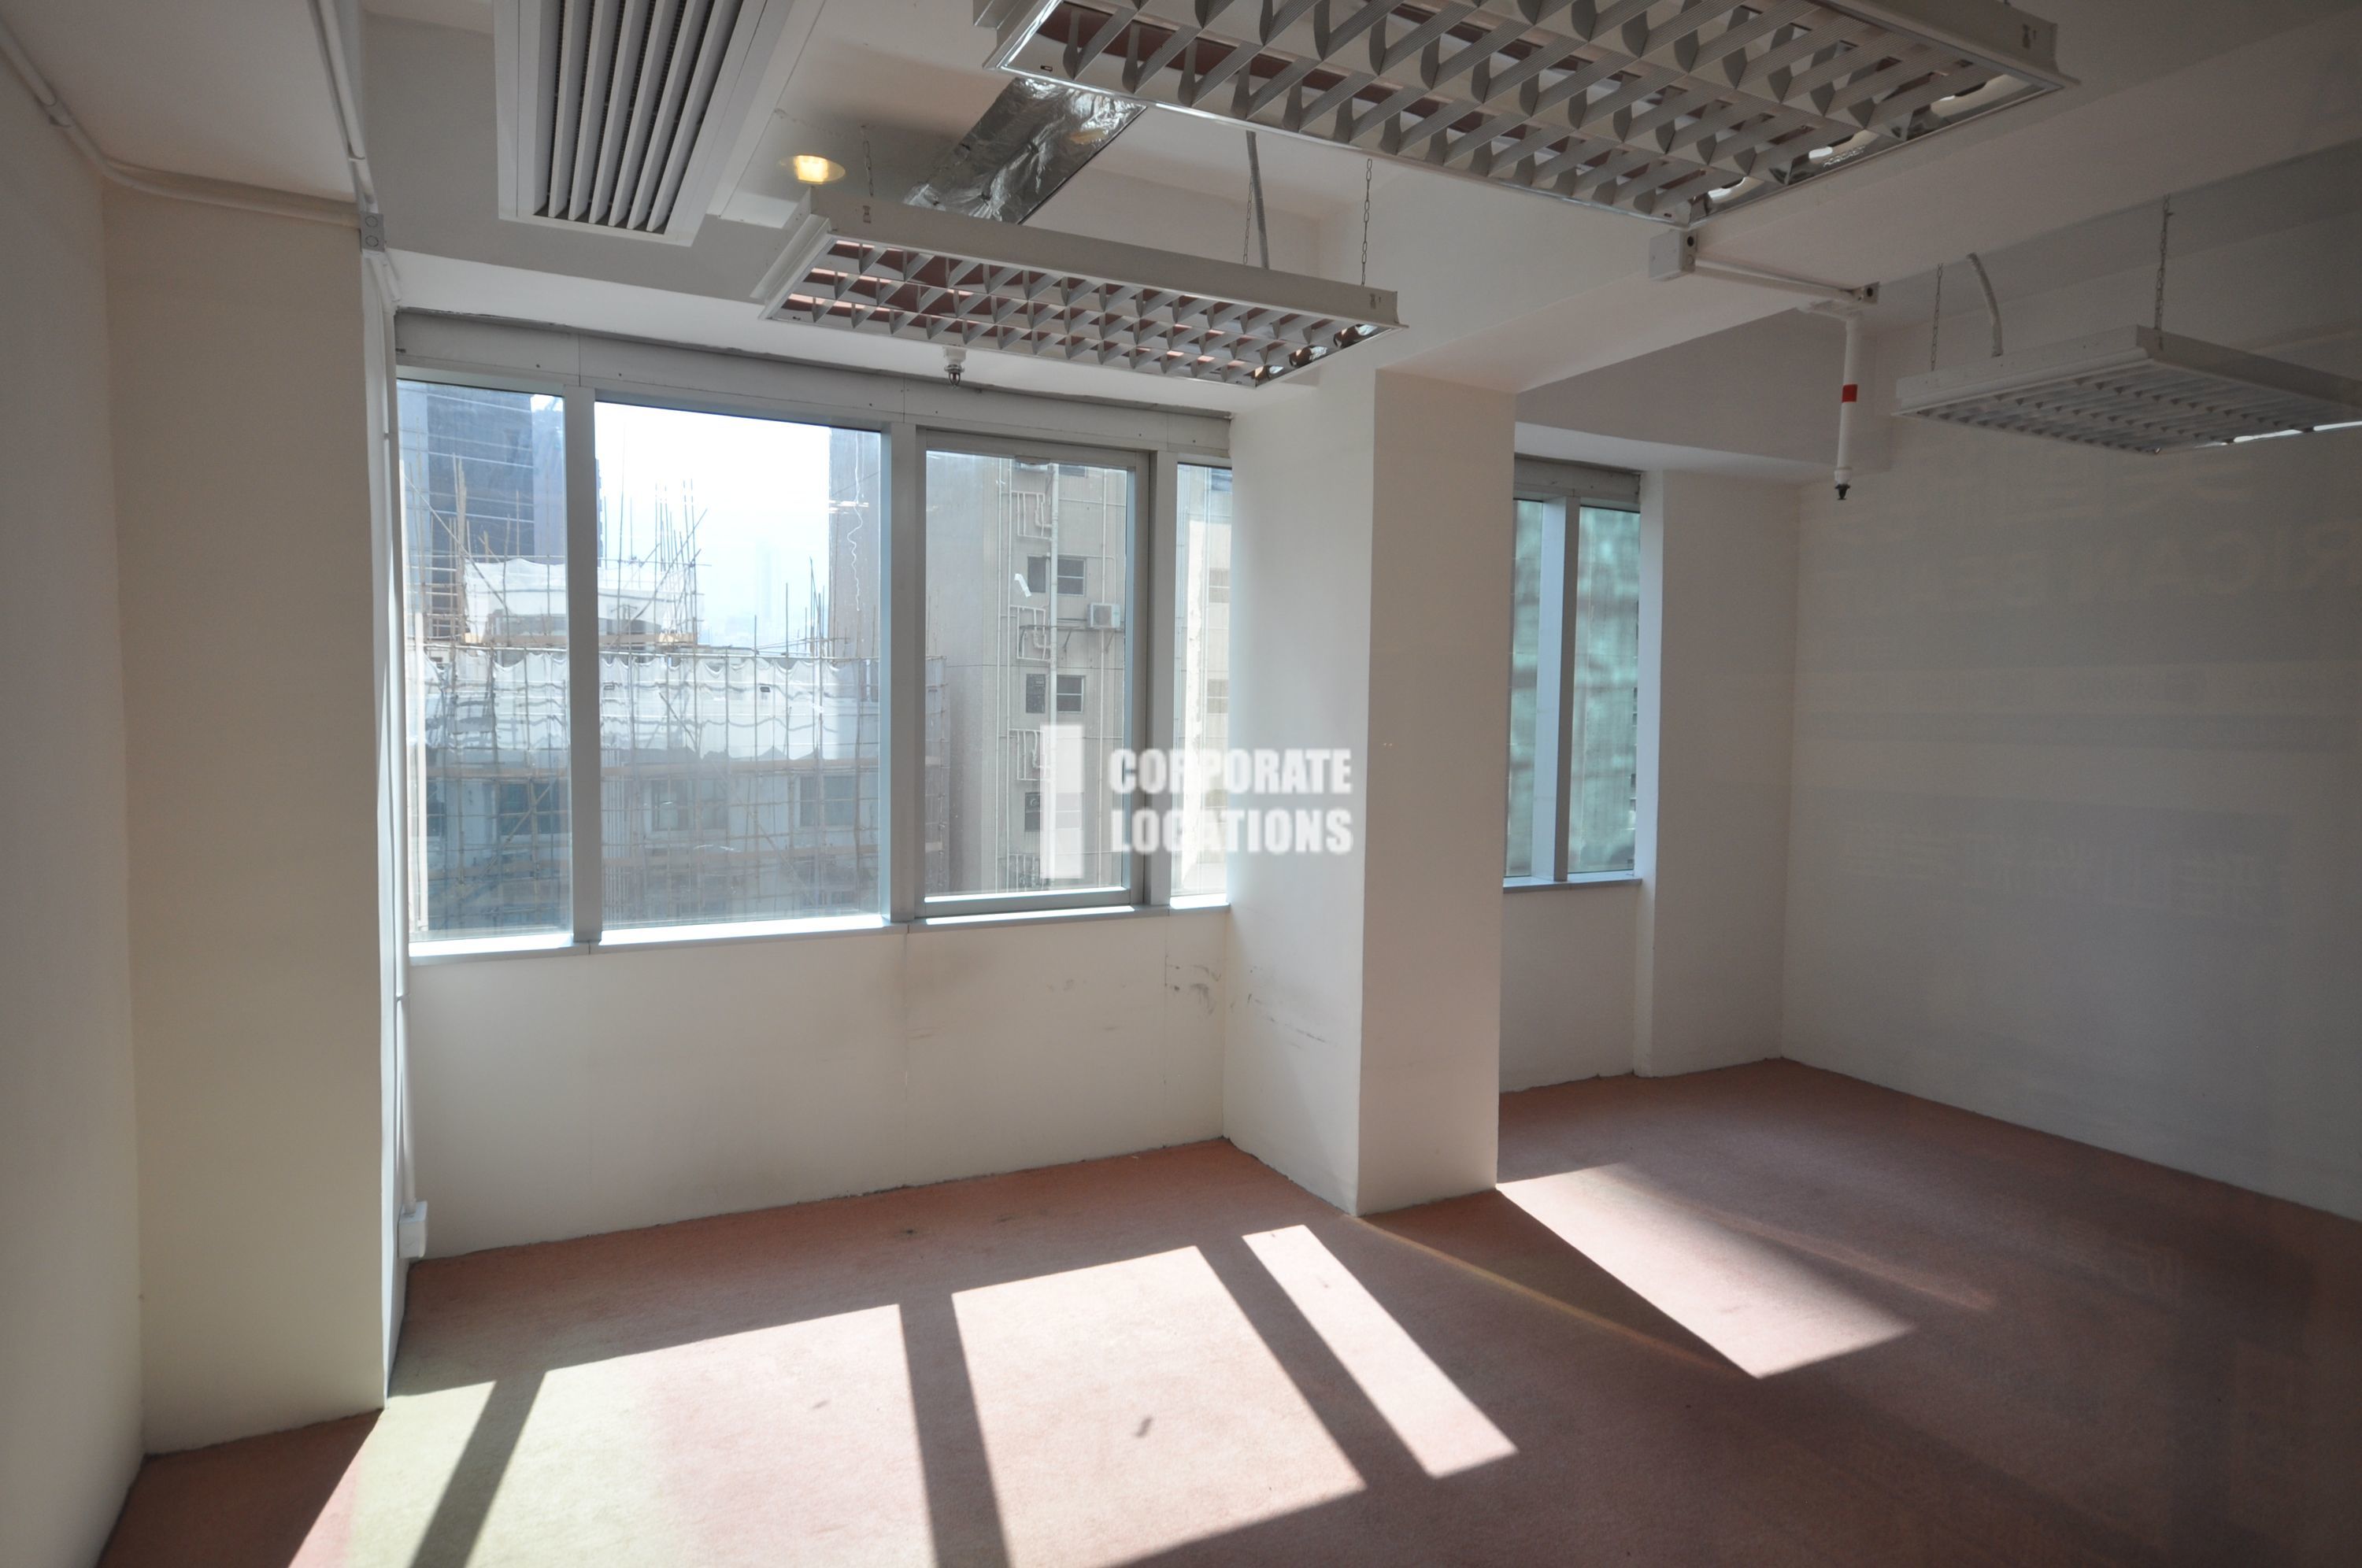 Lease offices in Bartlock Centre - Causeway Bay